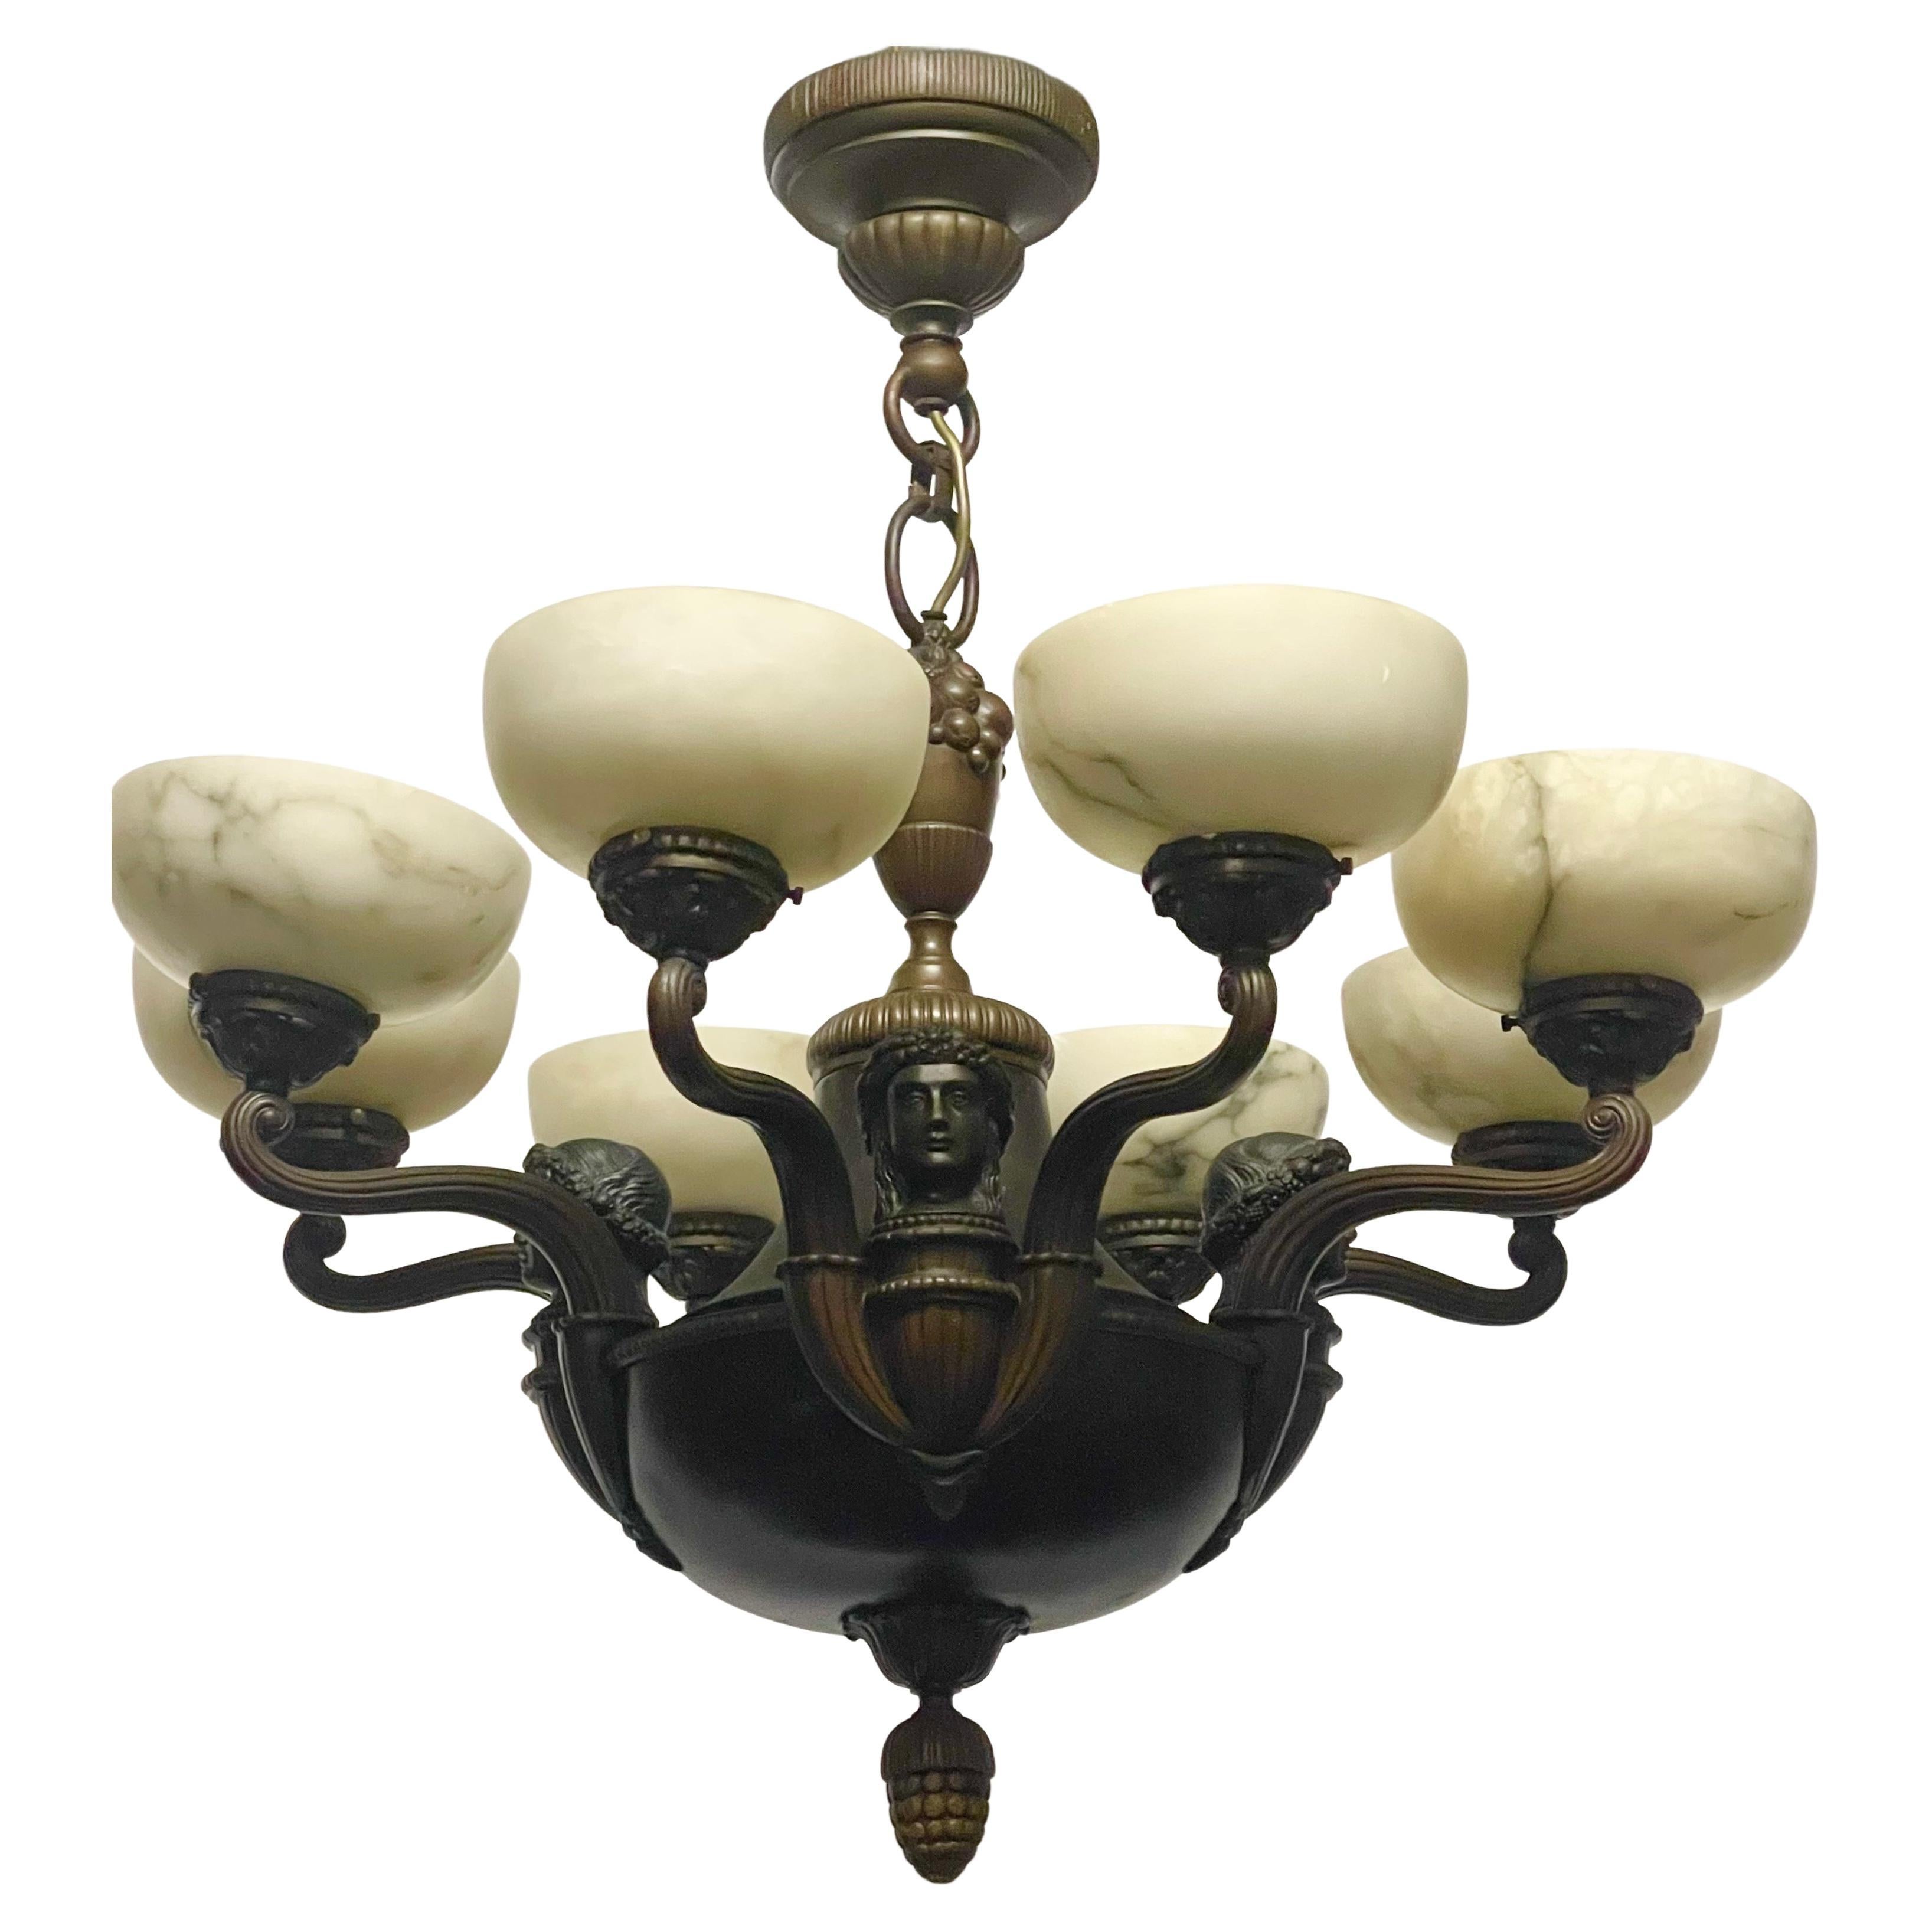 Stunning 8 -light alabaster and bronze chandelier, Germany, circa 1910s.
Socket: 8 x E27 or E26 for standard bulbs.
Newly rewired.